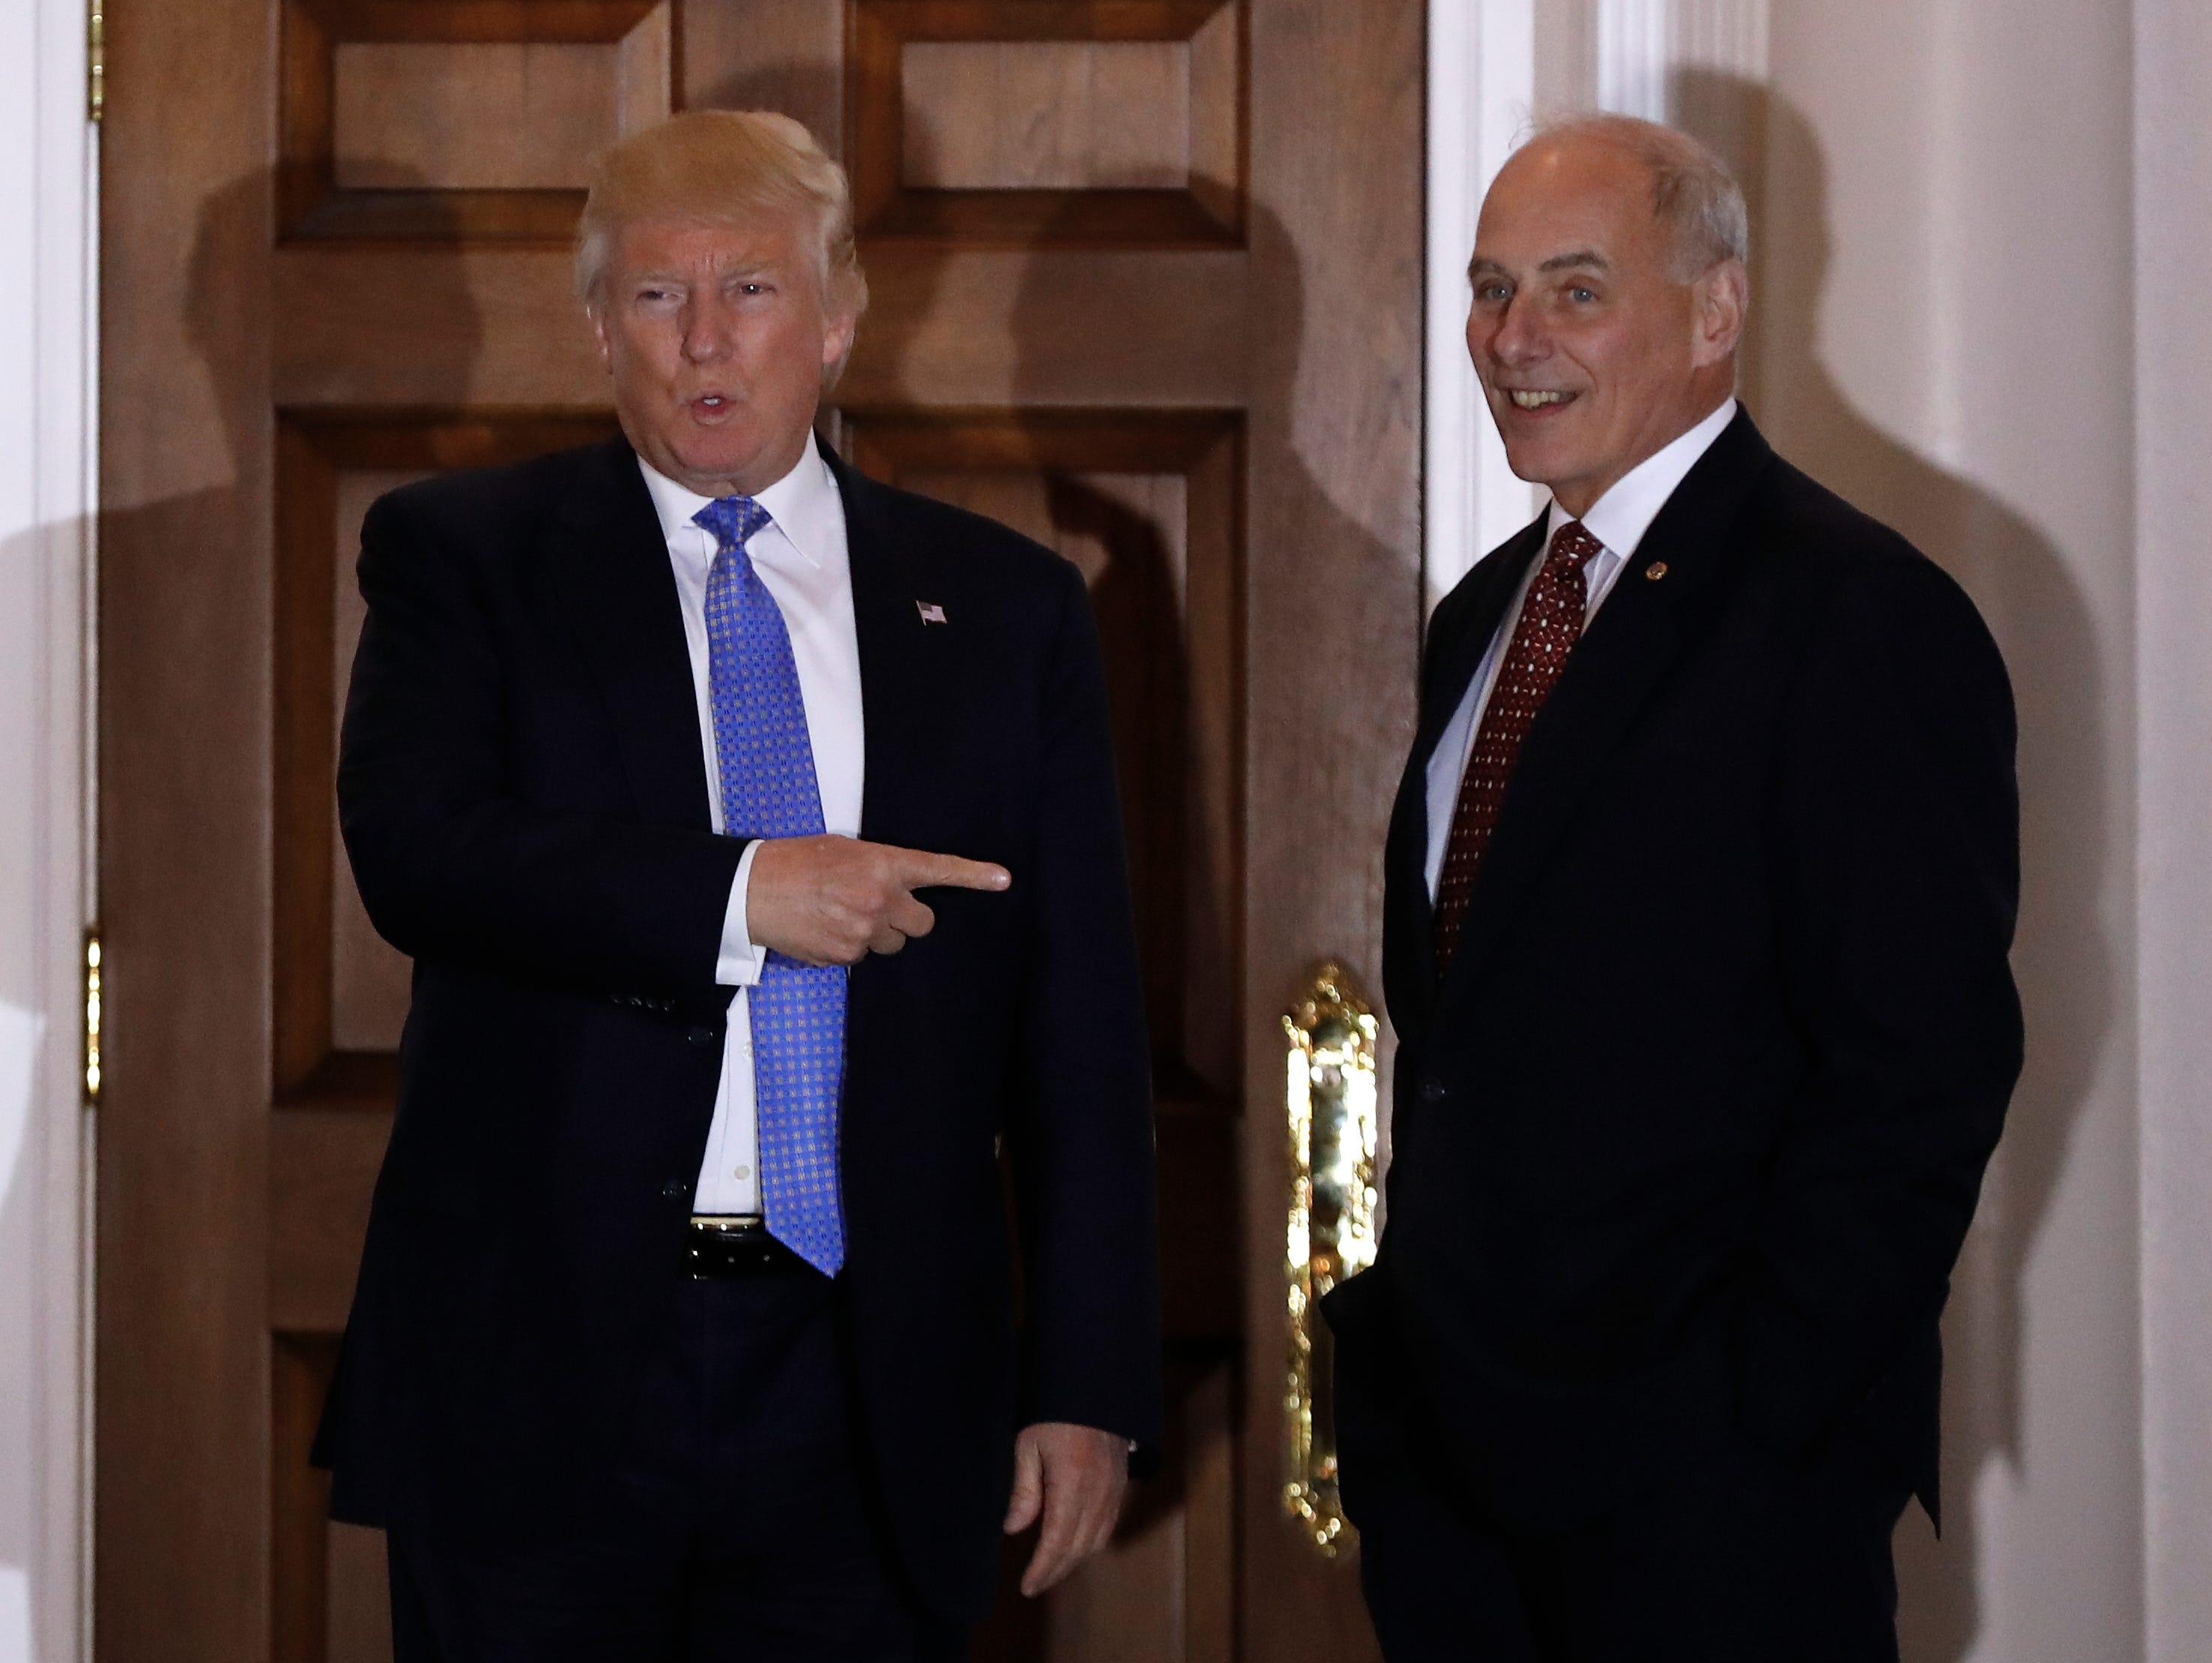 Retired Marine general John Kelly is Trump's choice to head the Department of Homeland Security.